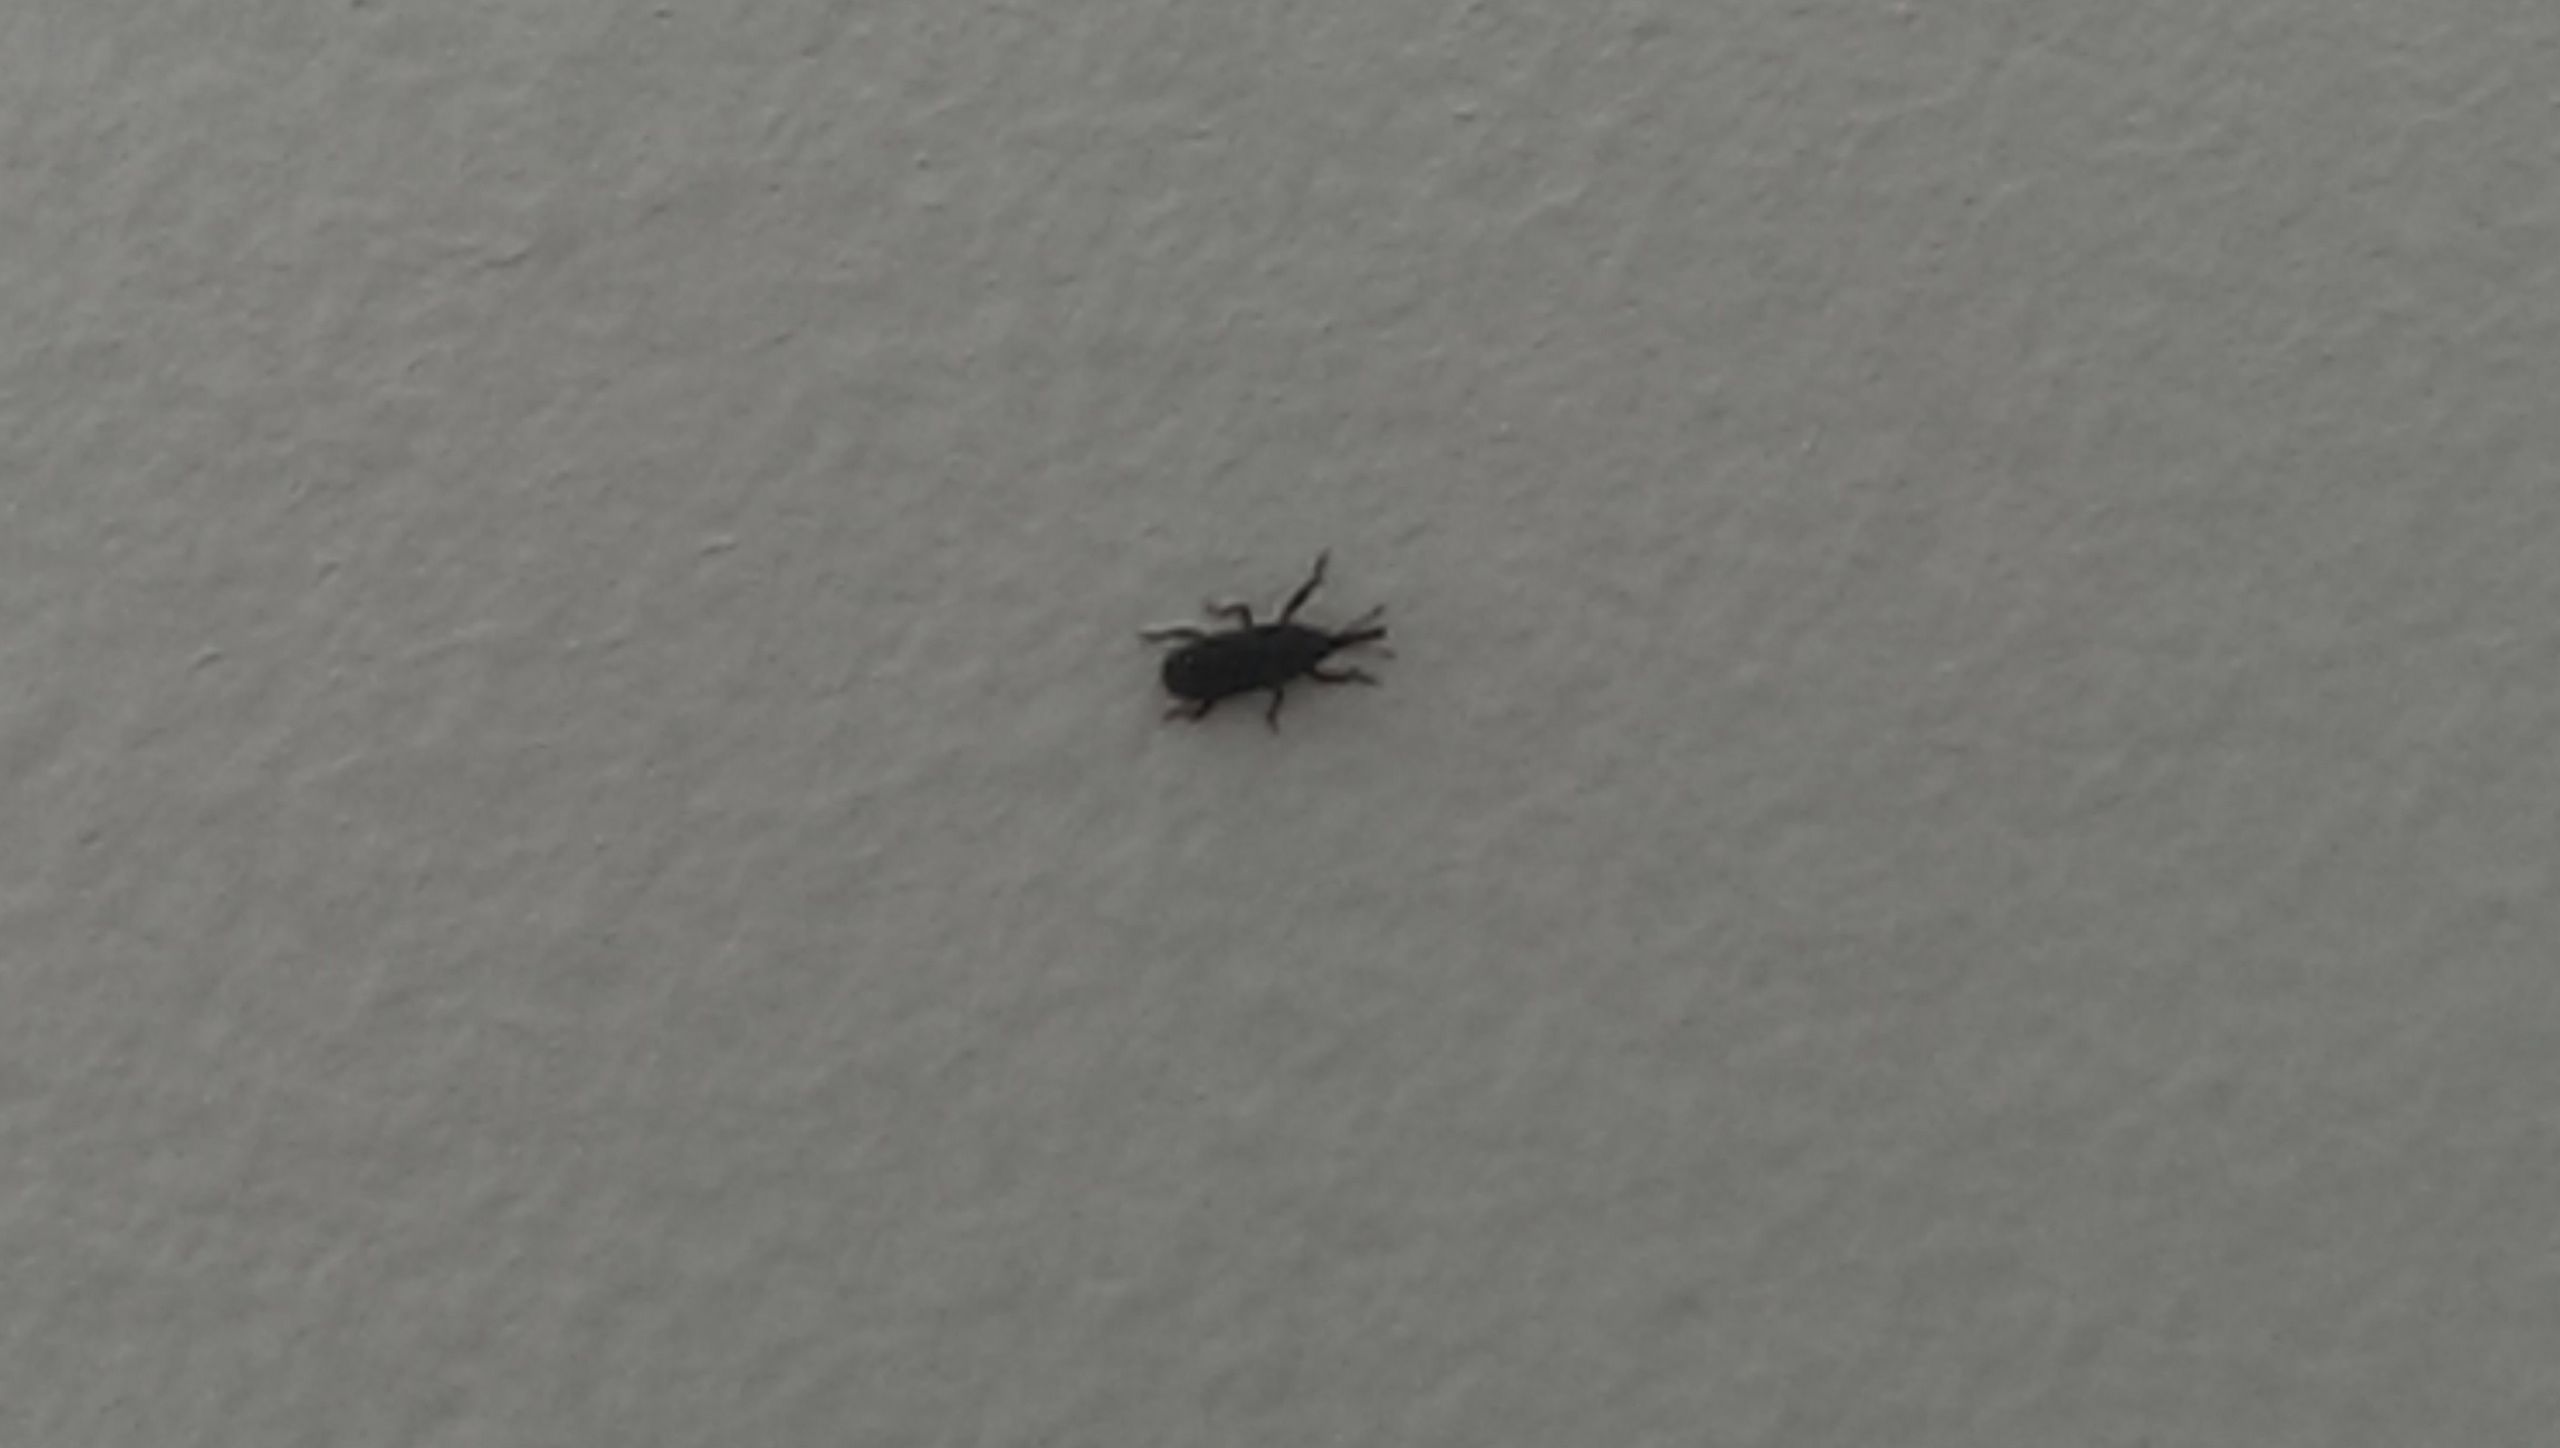 Small Black Bugs In Bathroom
 Trying to identify black ant like bugs found occasionally